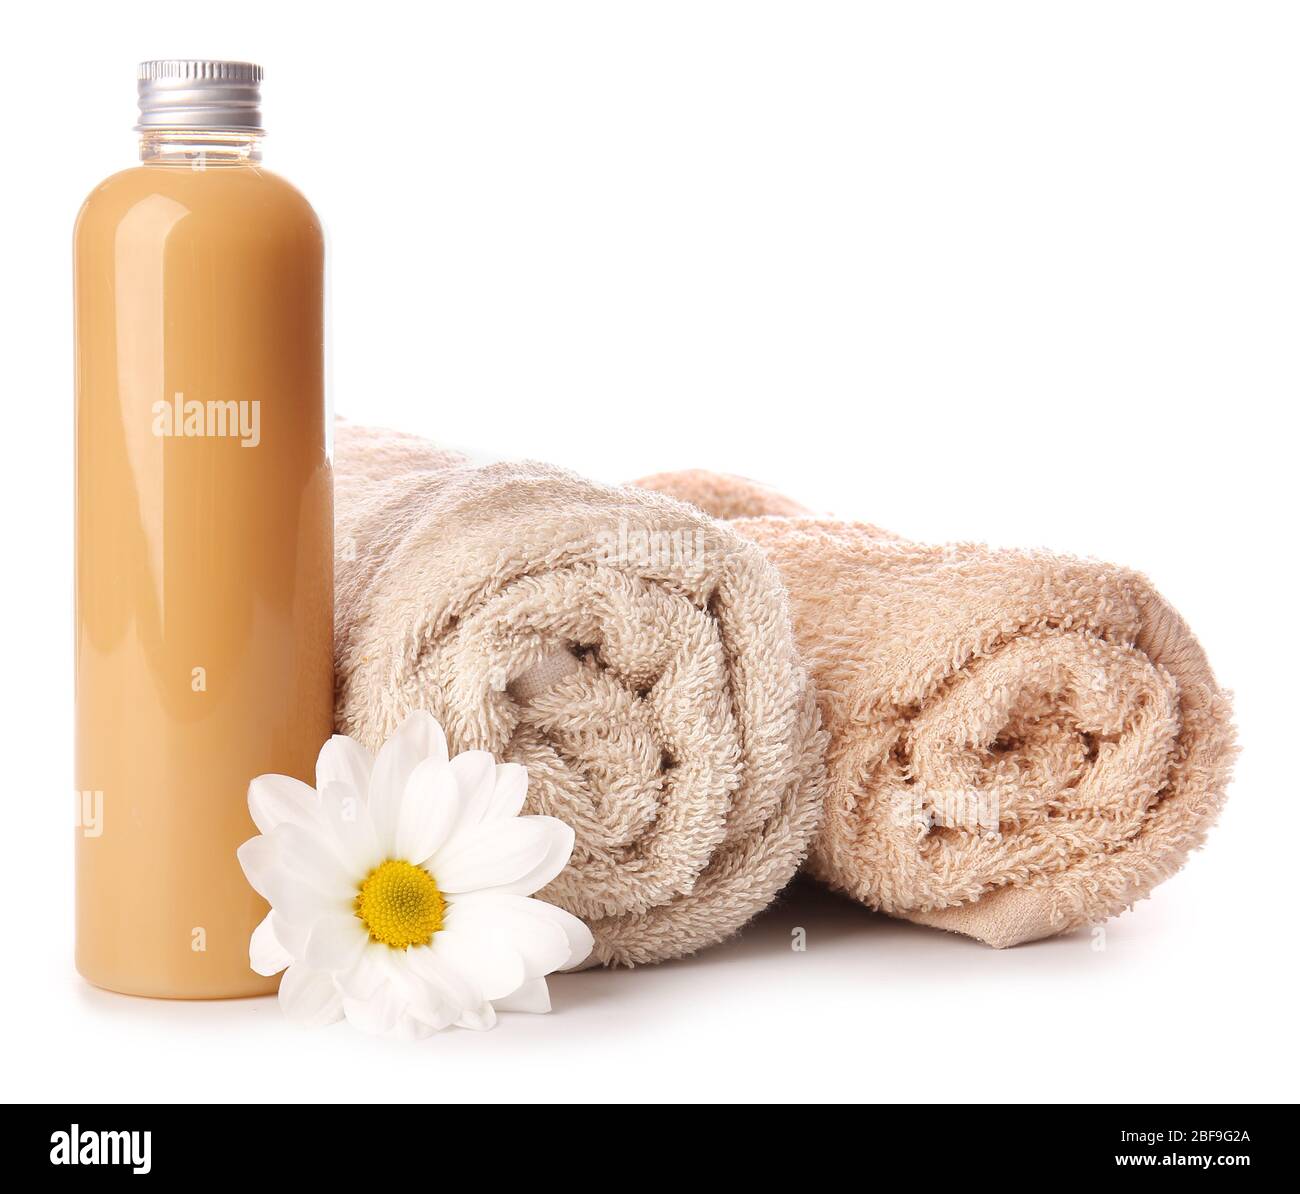 Shampoo and towels on white background Stock Photo